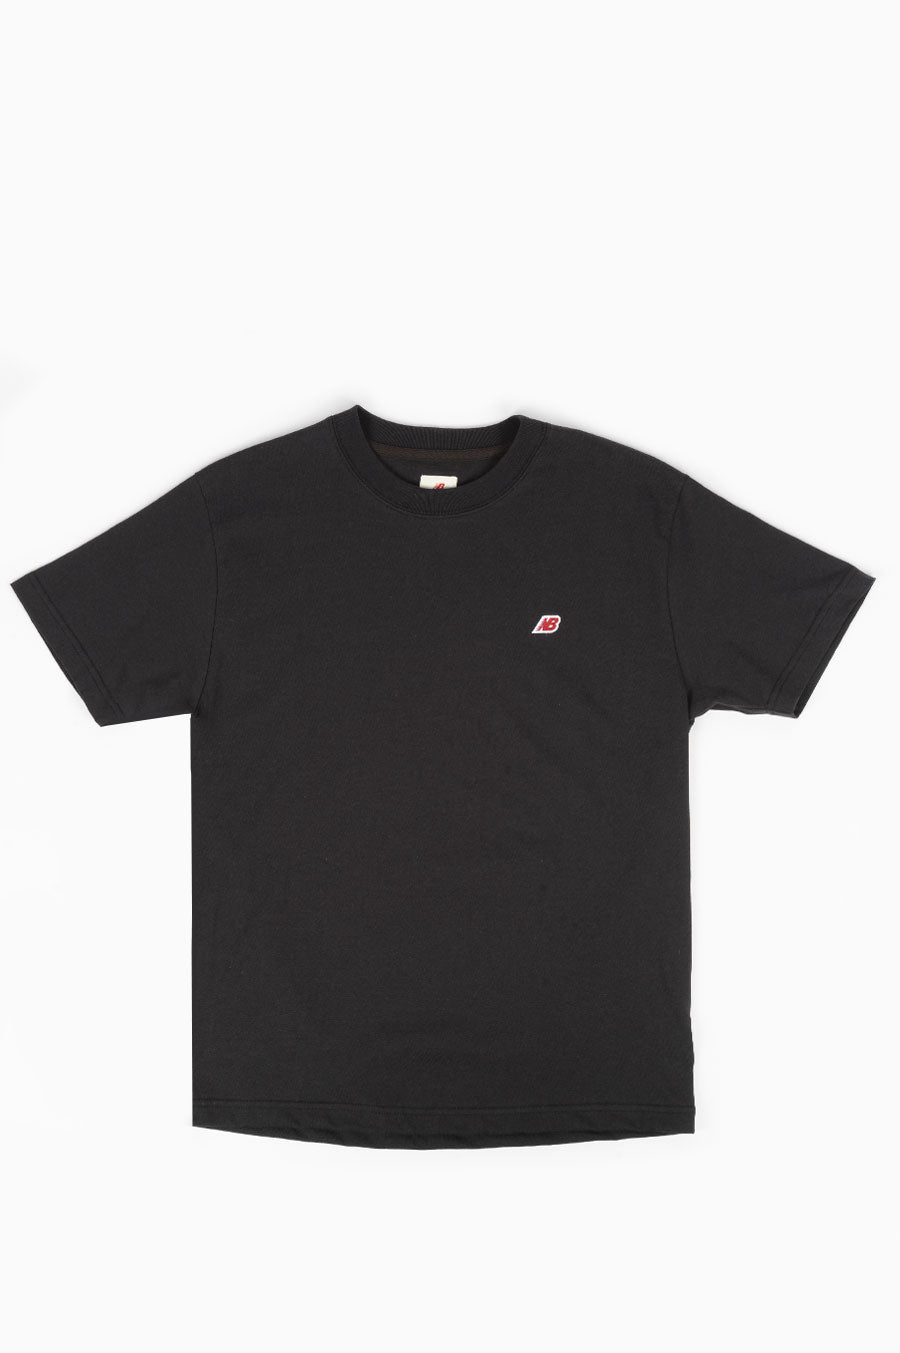 NEW BALANCE MADE IN BLACK SS BLENDS – USA TEE